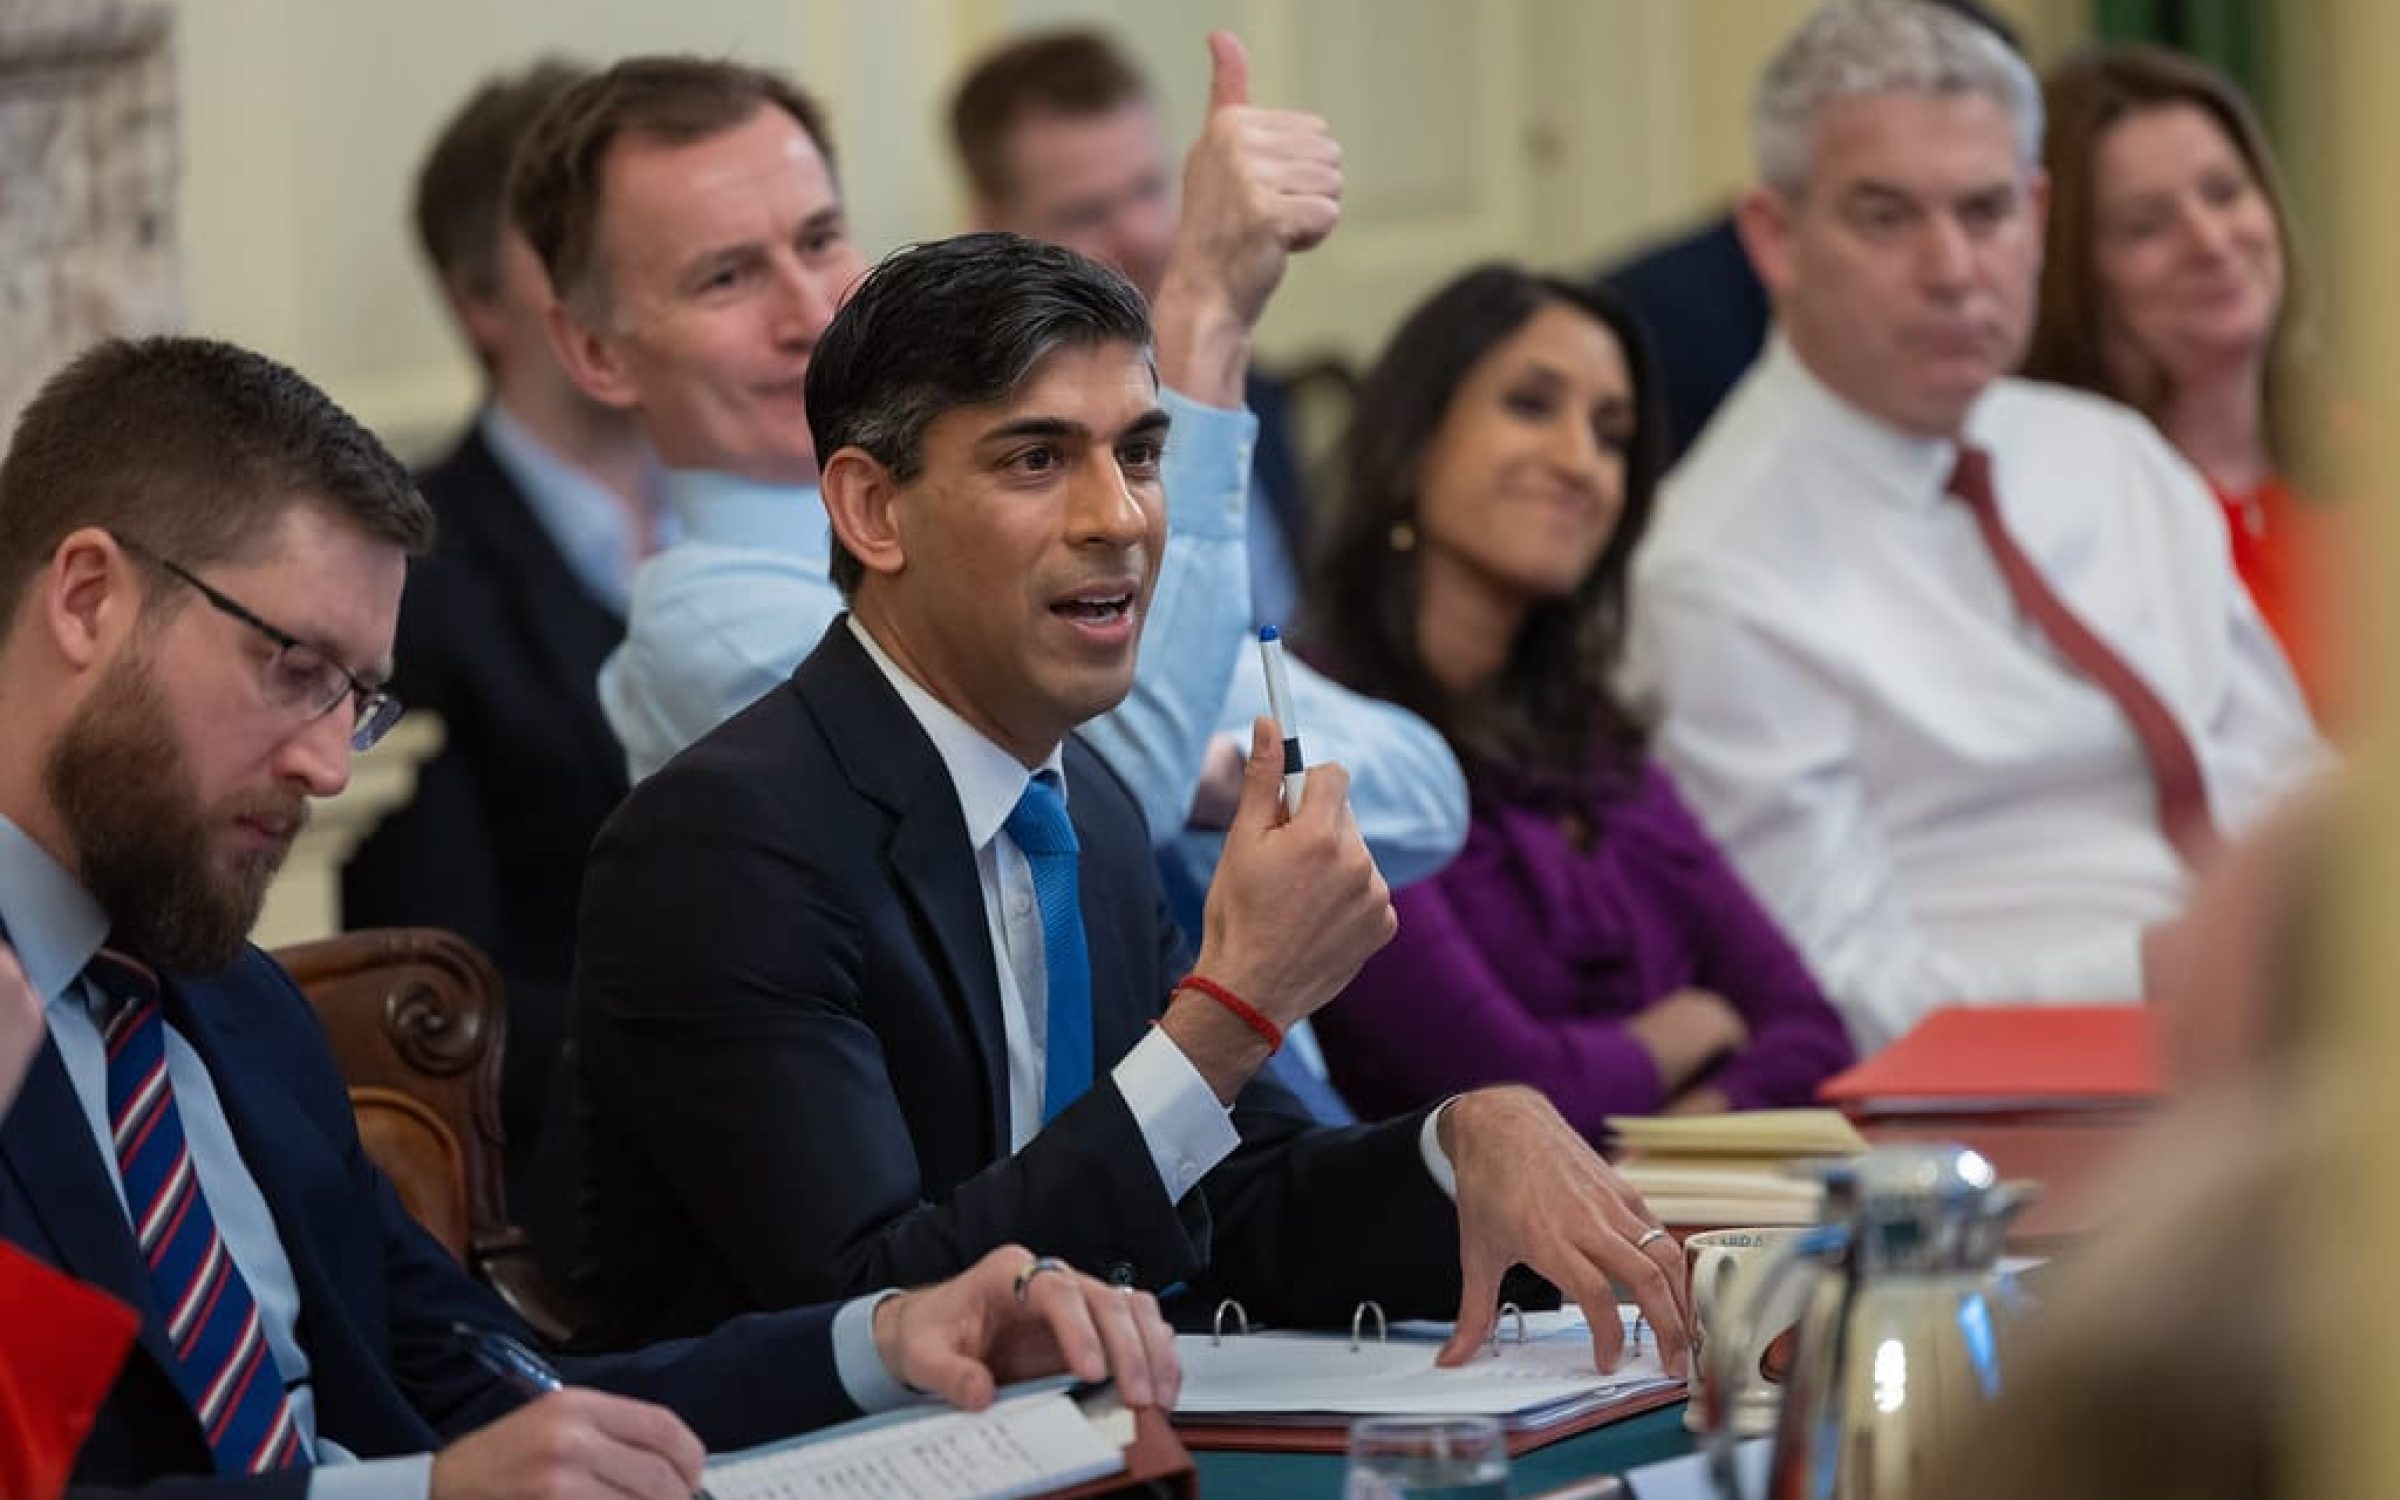 The Prime Minister Rishi Sunak hosts weekly cabinet in 10 Downing Street. Tories. (via Simon Walker / No 10 Downing Street)